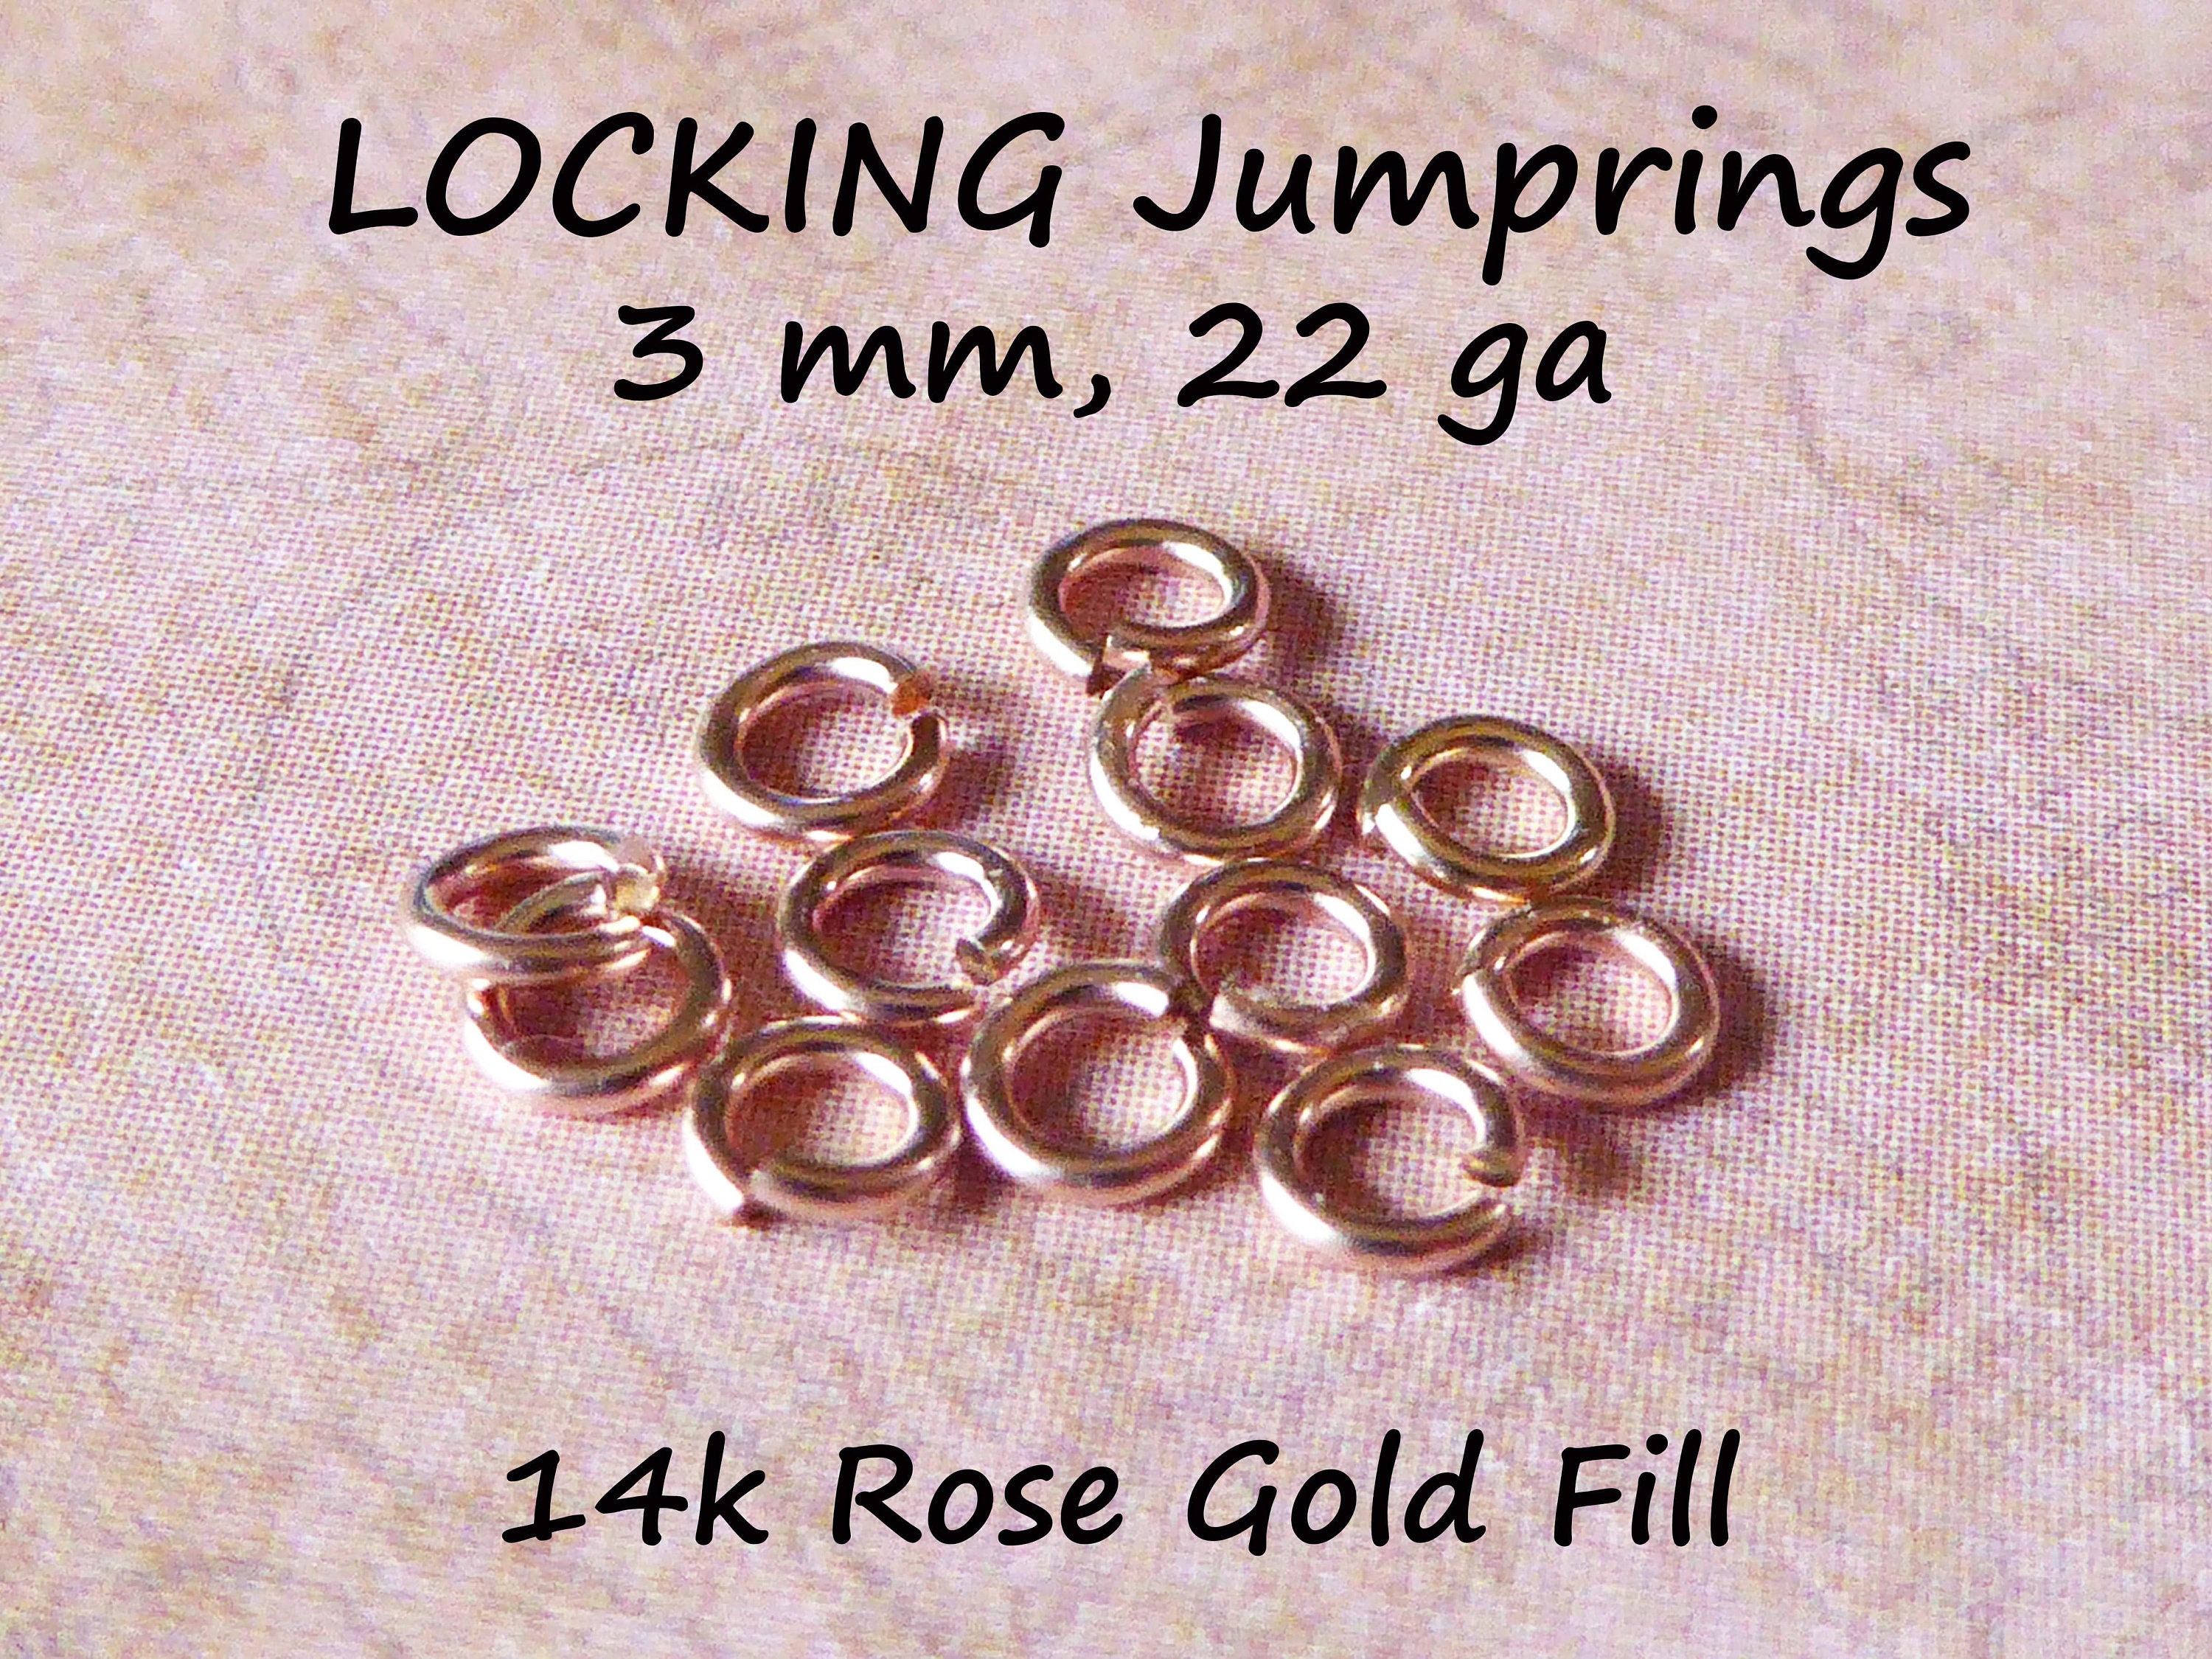 Xyer Open Jump Rings Kit Small Size Fashionable Jewelry Making